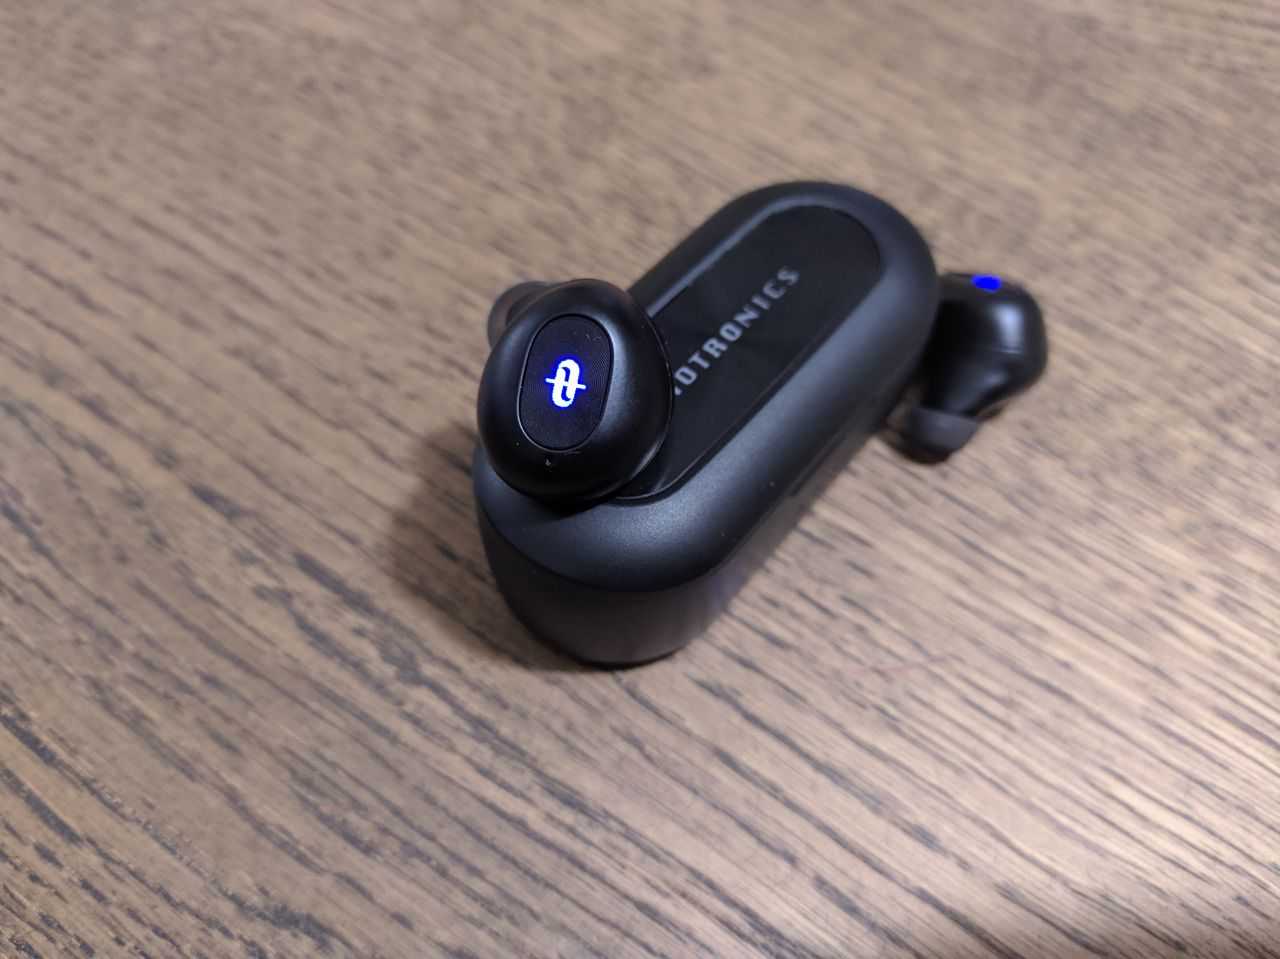 TaoTronics SoundLiberty 77 review, from China with fury